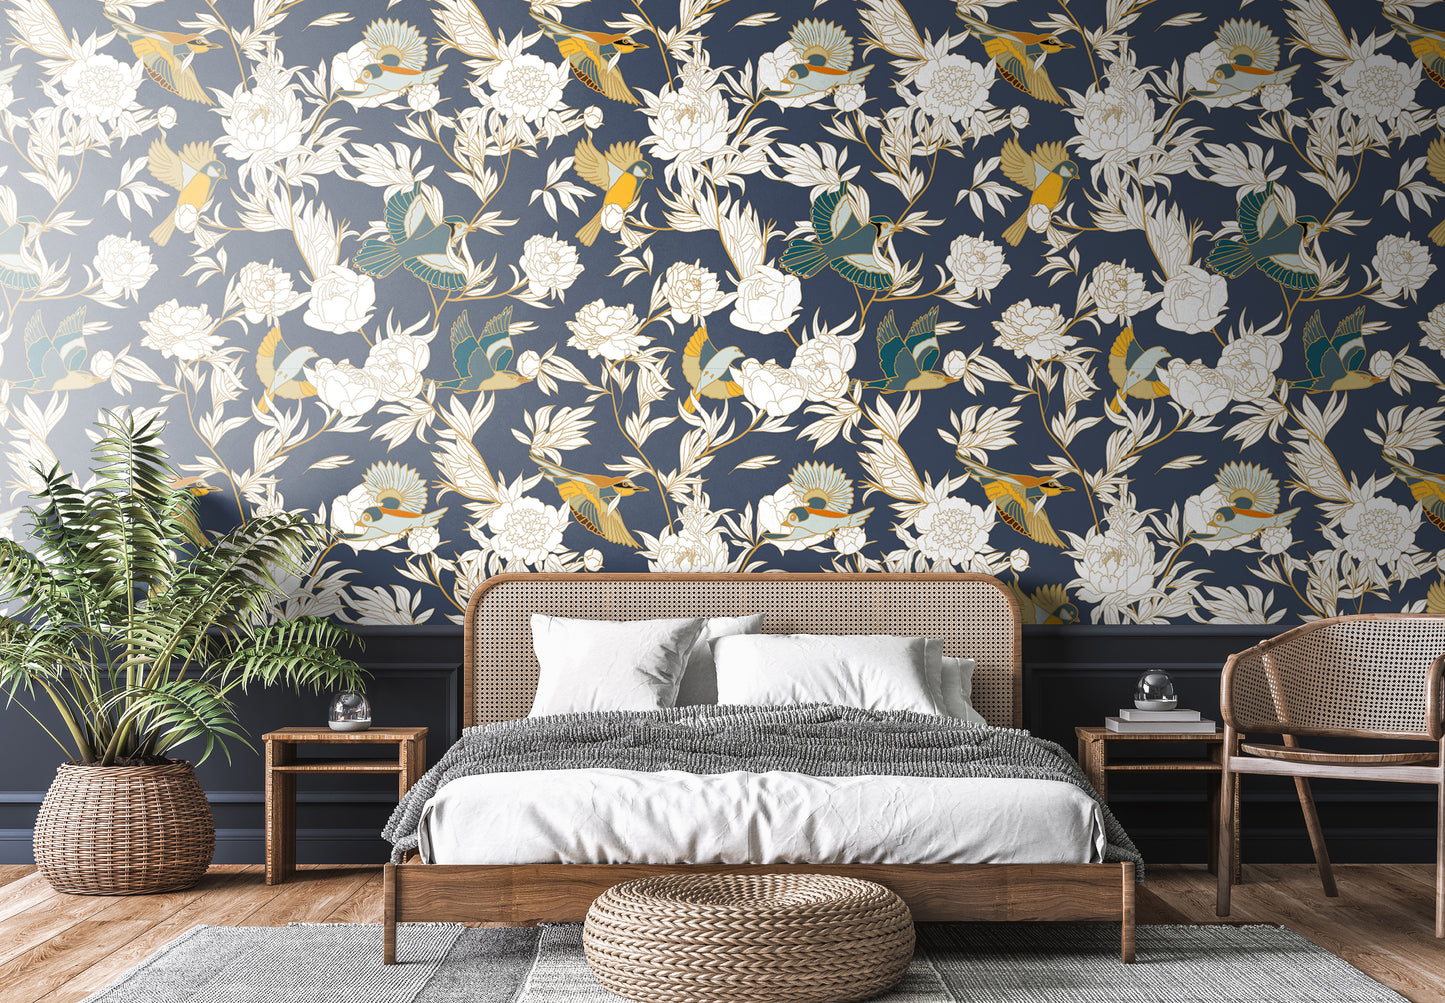 Floral Ceramic Bird Removable Peel And Stick Wallpaper